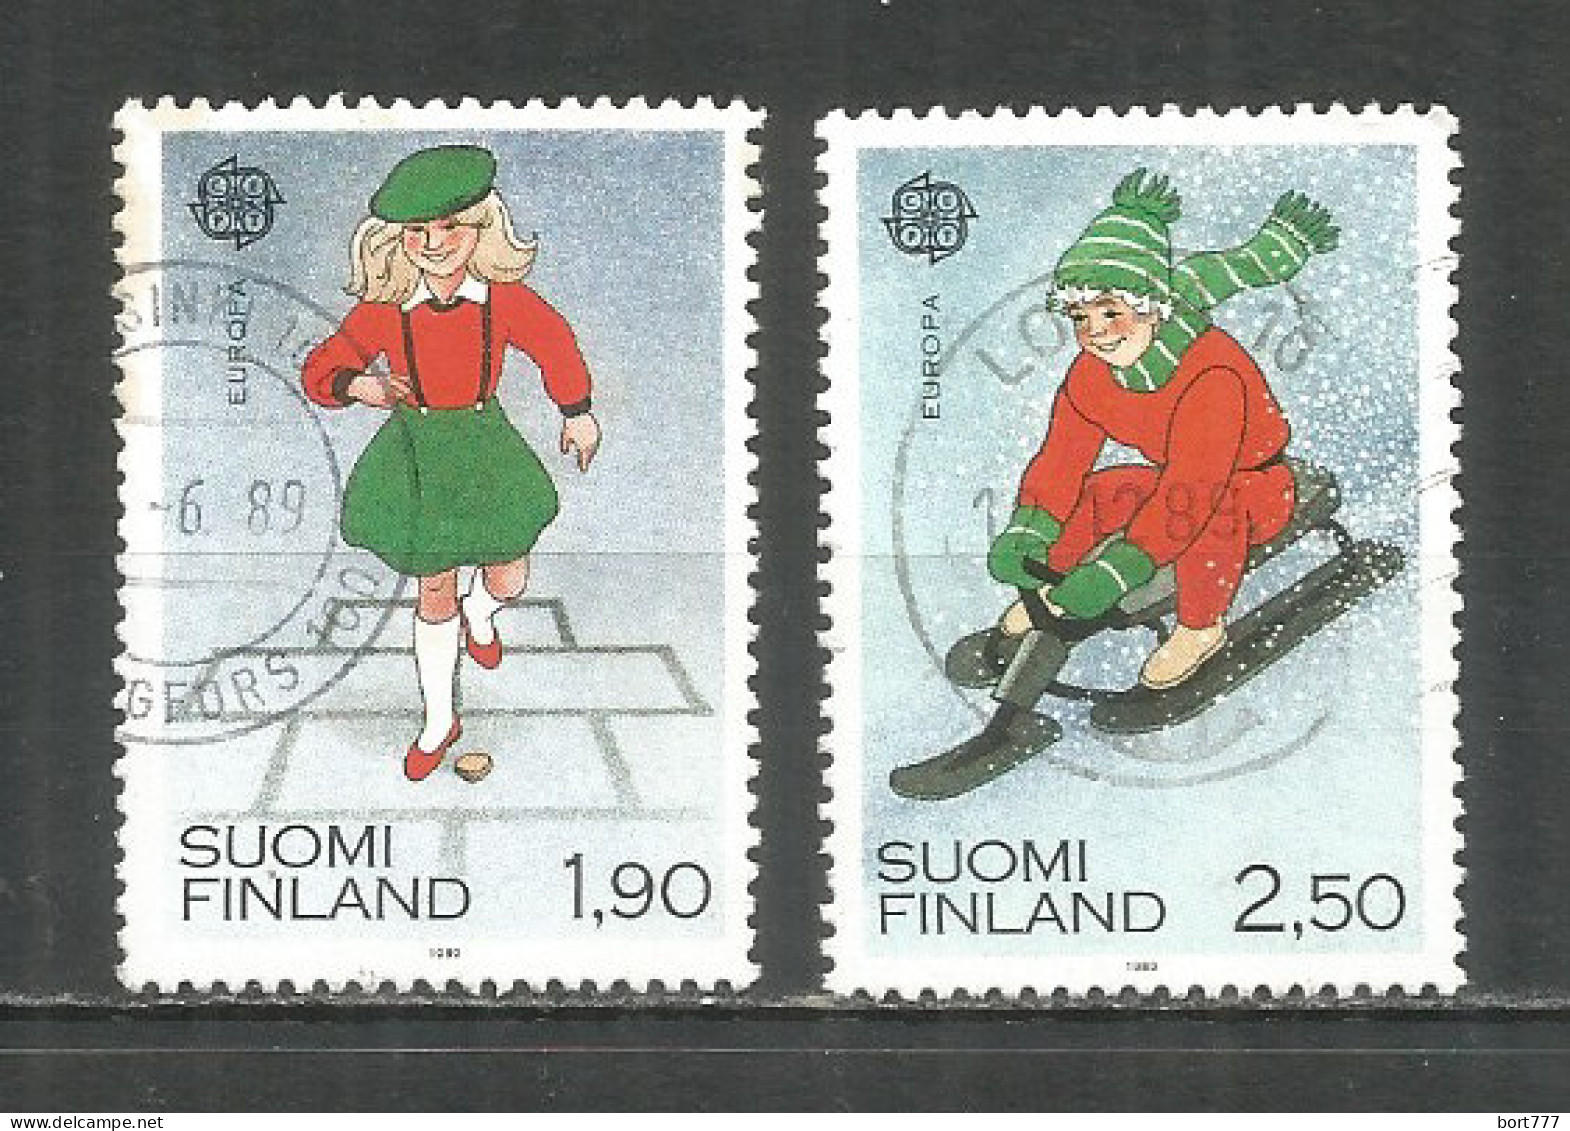 Finland 1989 Used Stamps EUROPA CEPT - Used Stamps